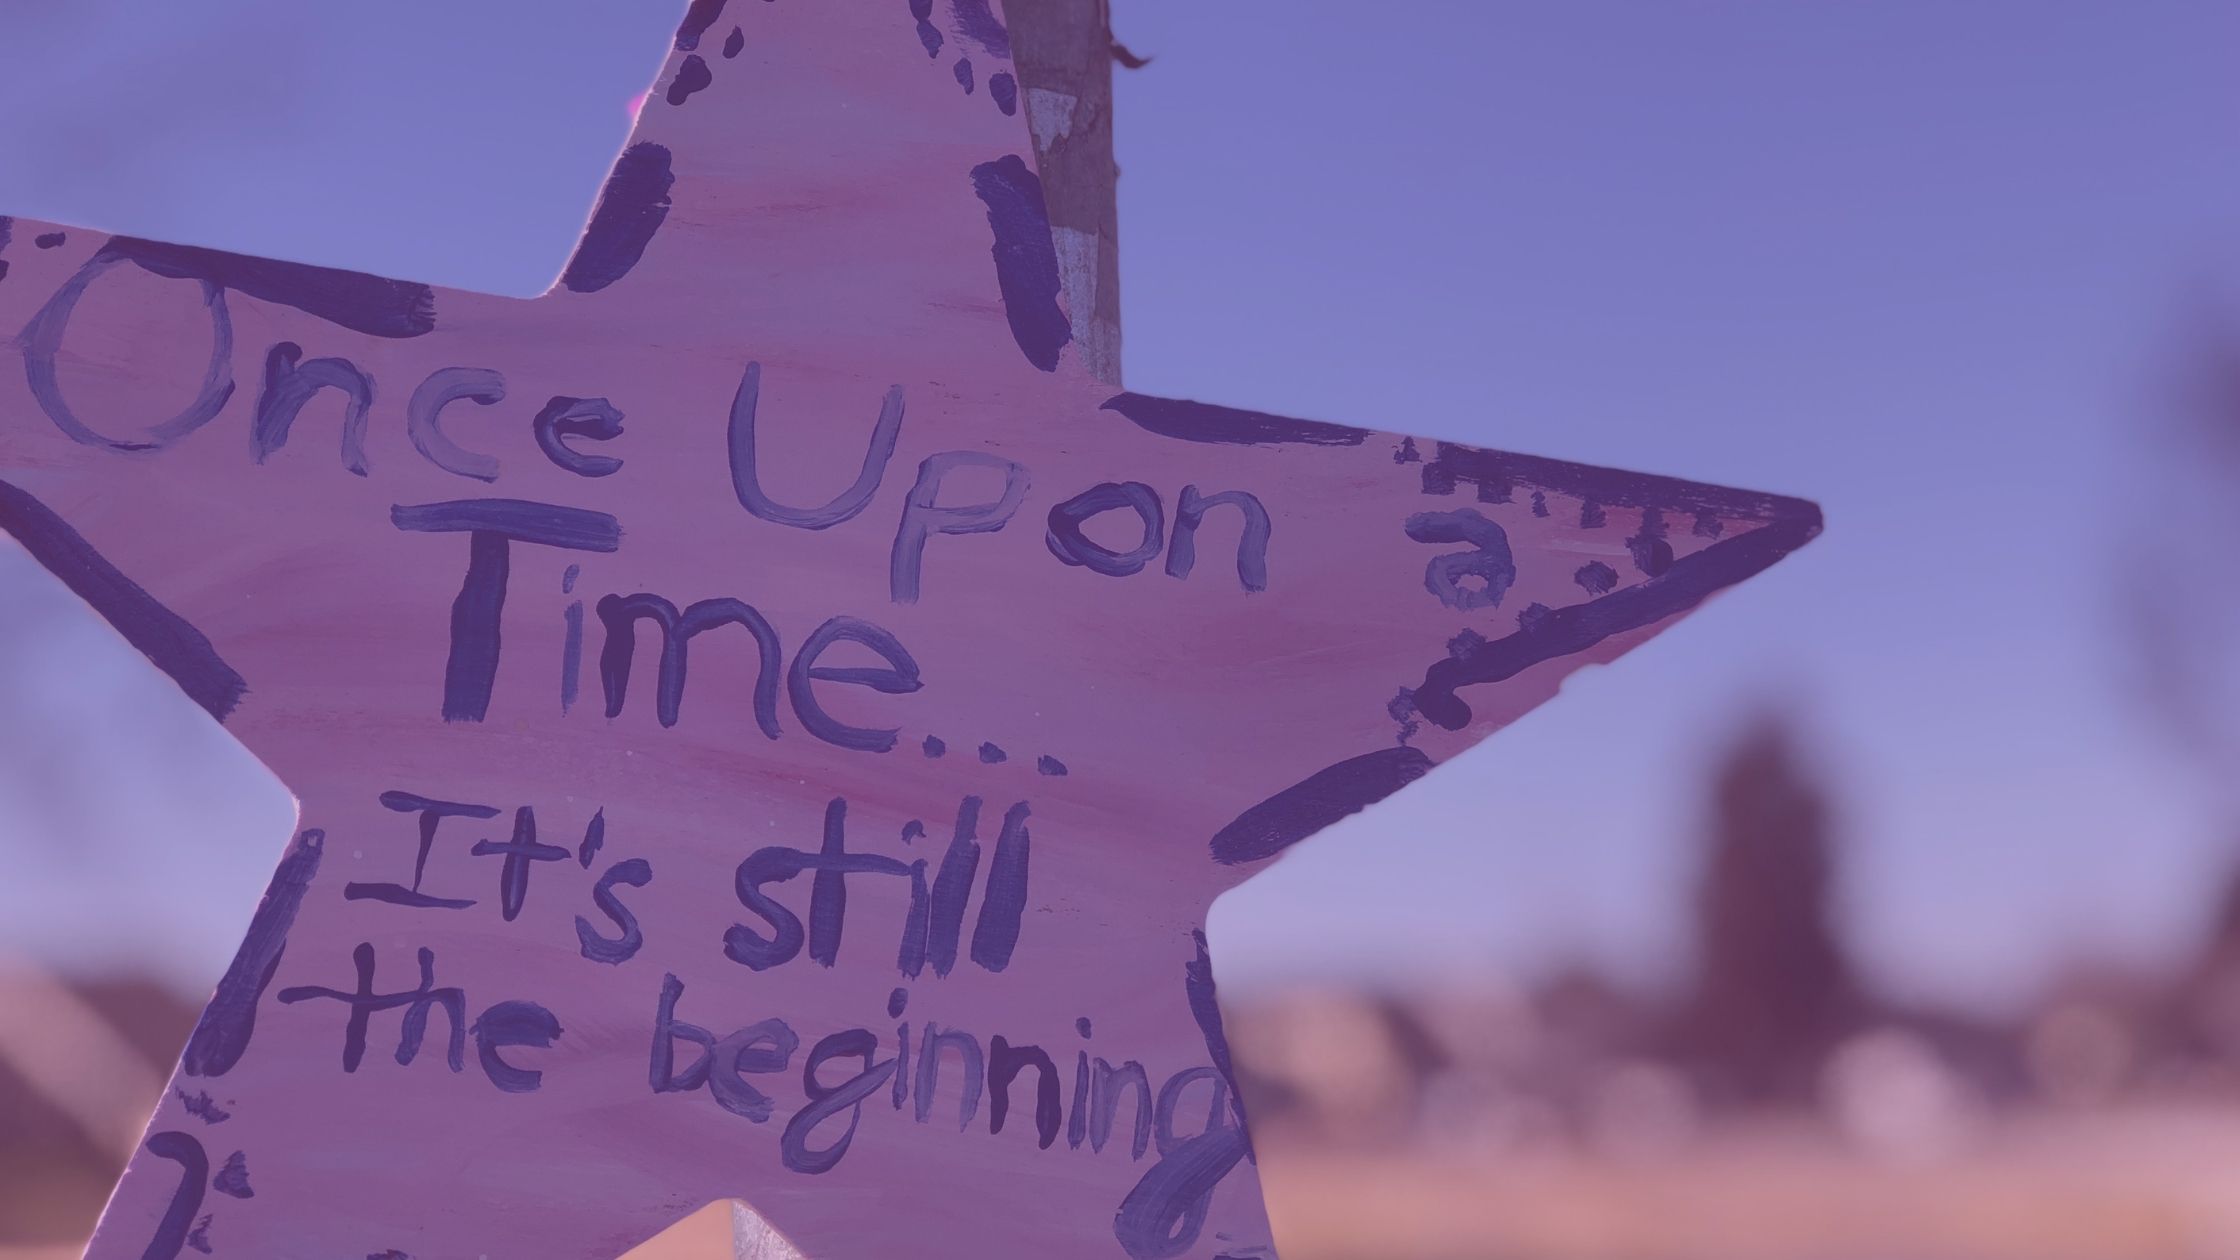 A Stars of HOPE painted with the words "Once Upon a time... It's still the beginning"